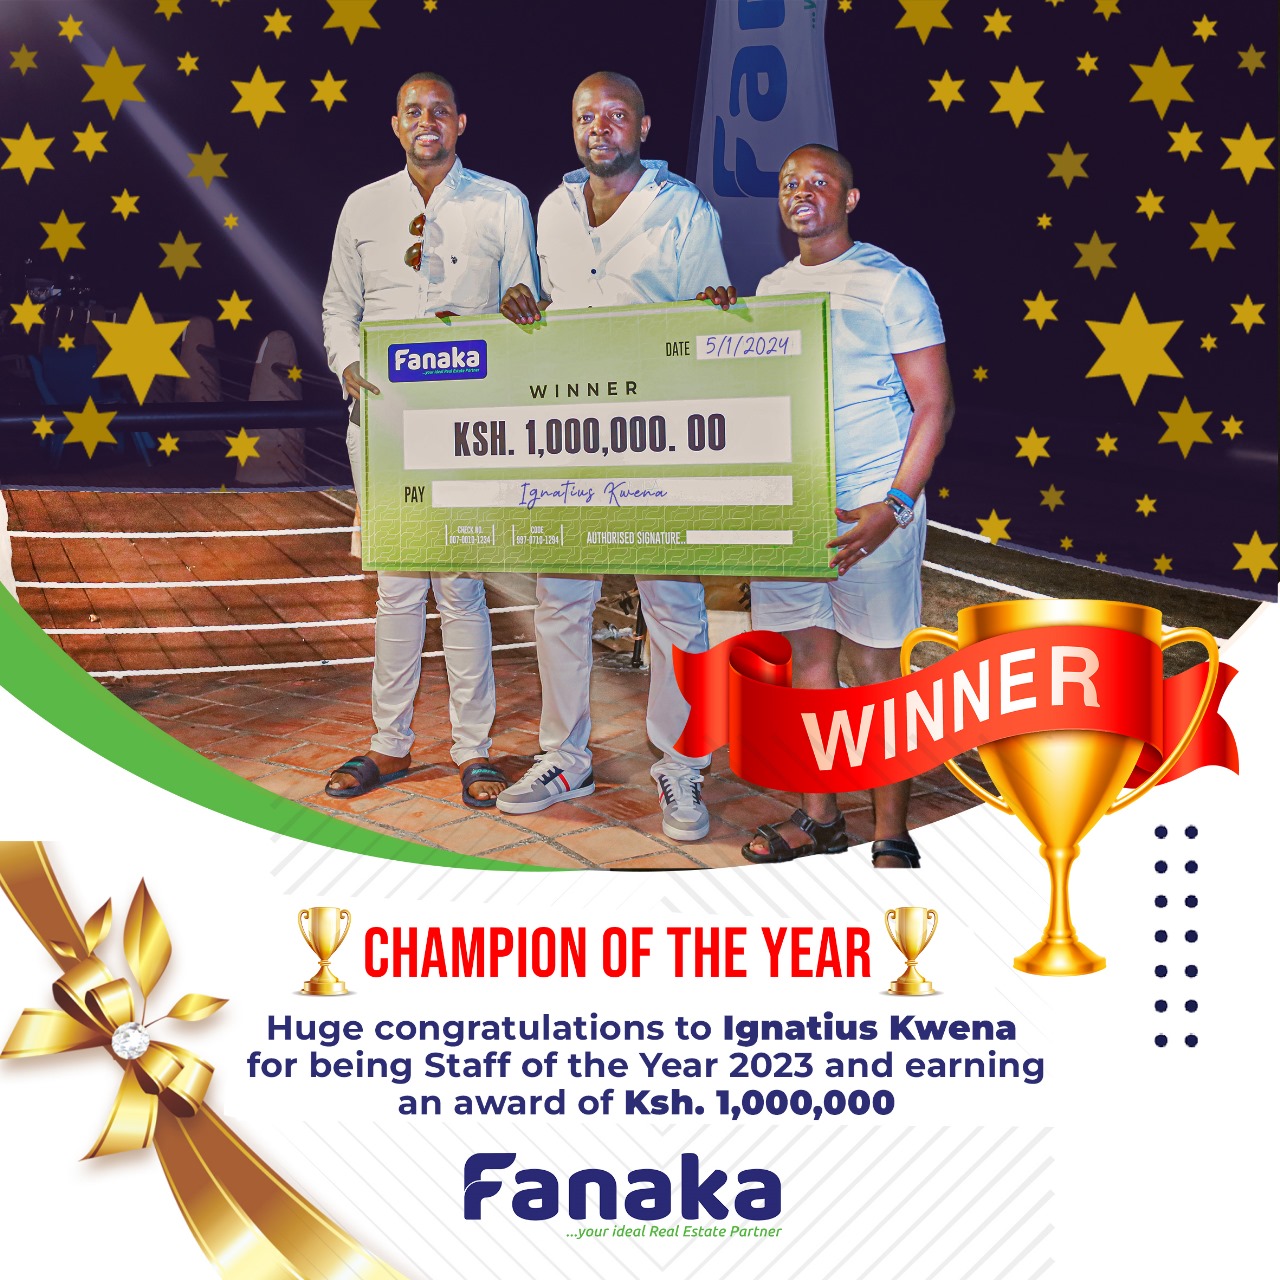 FANAKA REAL ESTATE CELEBRATES EXCELLENCE: EMPLOYEE OF THE YEAR AWARDED 1,000,000 KSH!